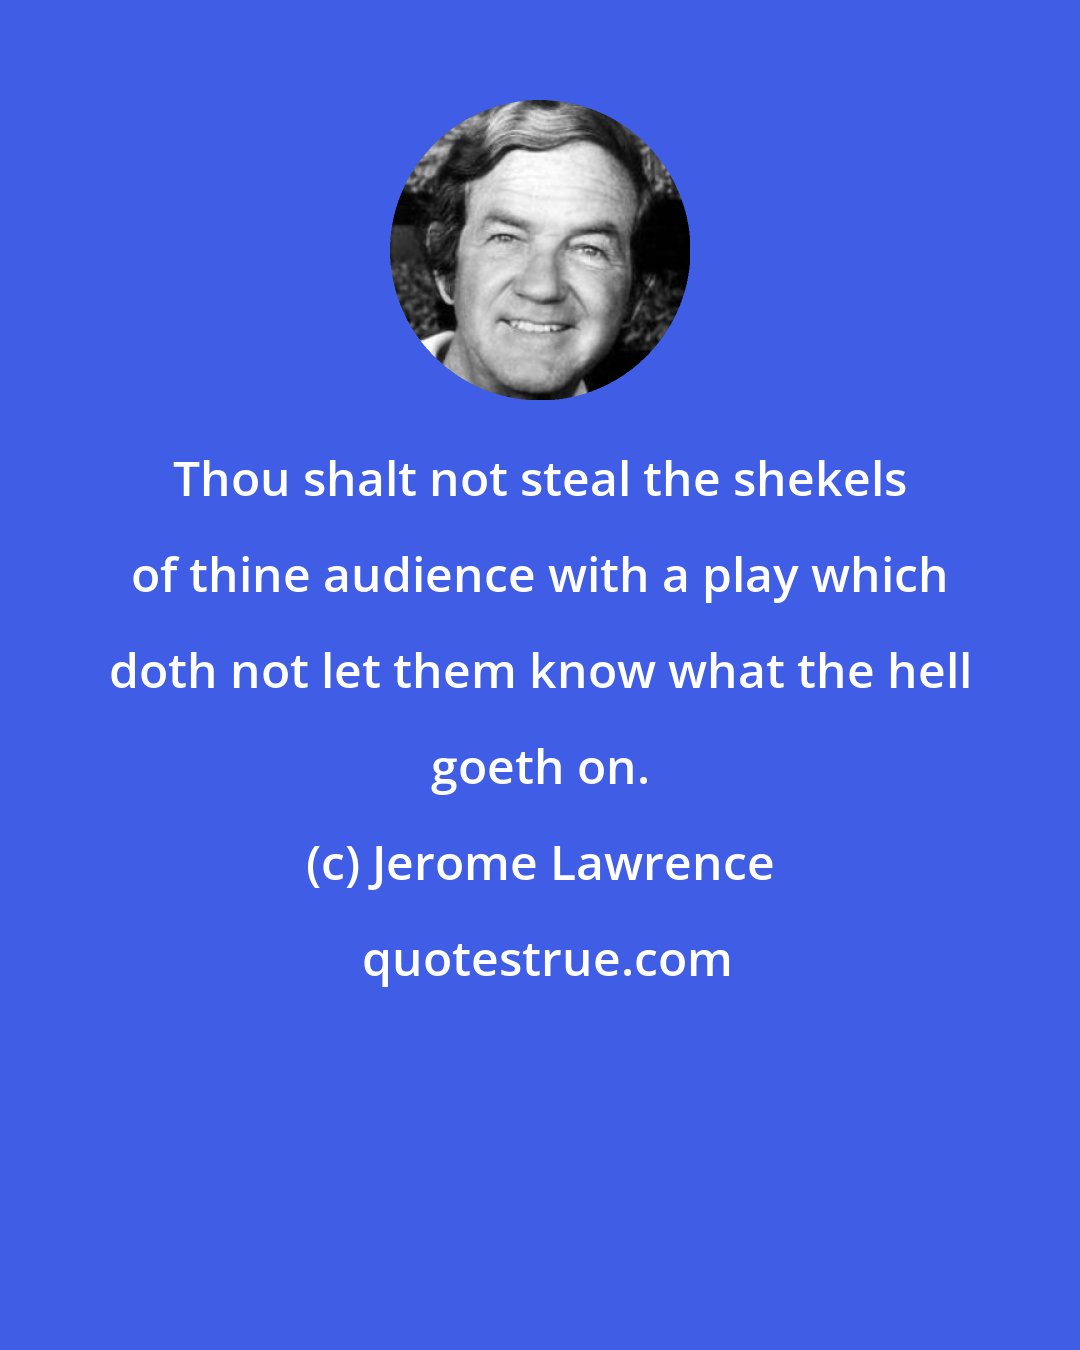 Jerome Lawrence: Thou shalt not steal the shekels of thine audience with a play which doth not let them know what the hell goeth on.